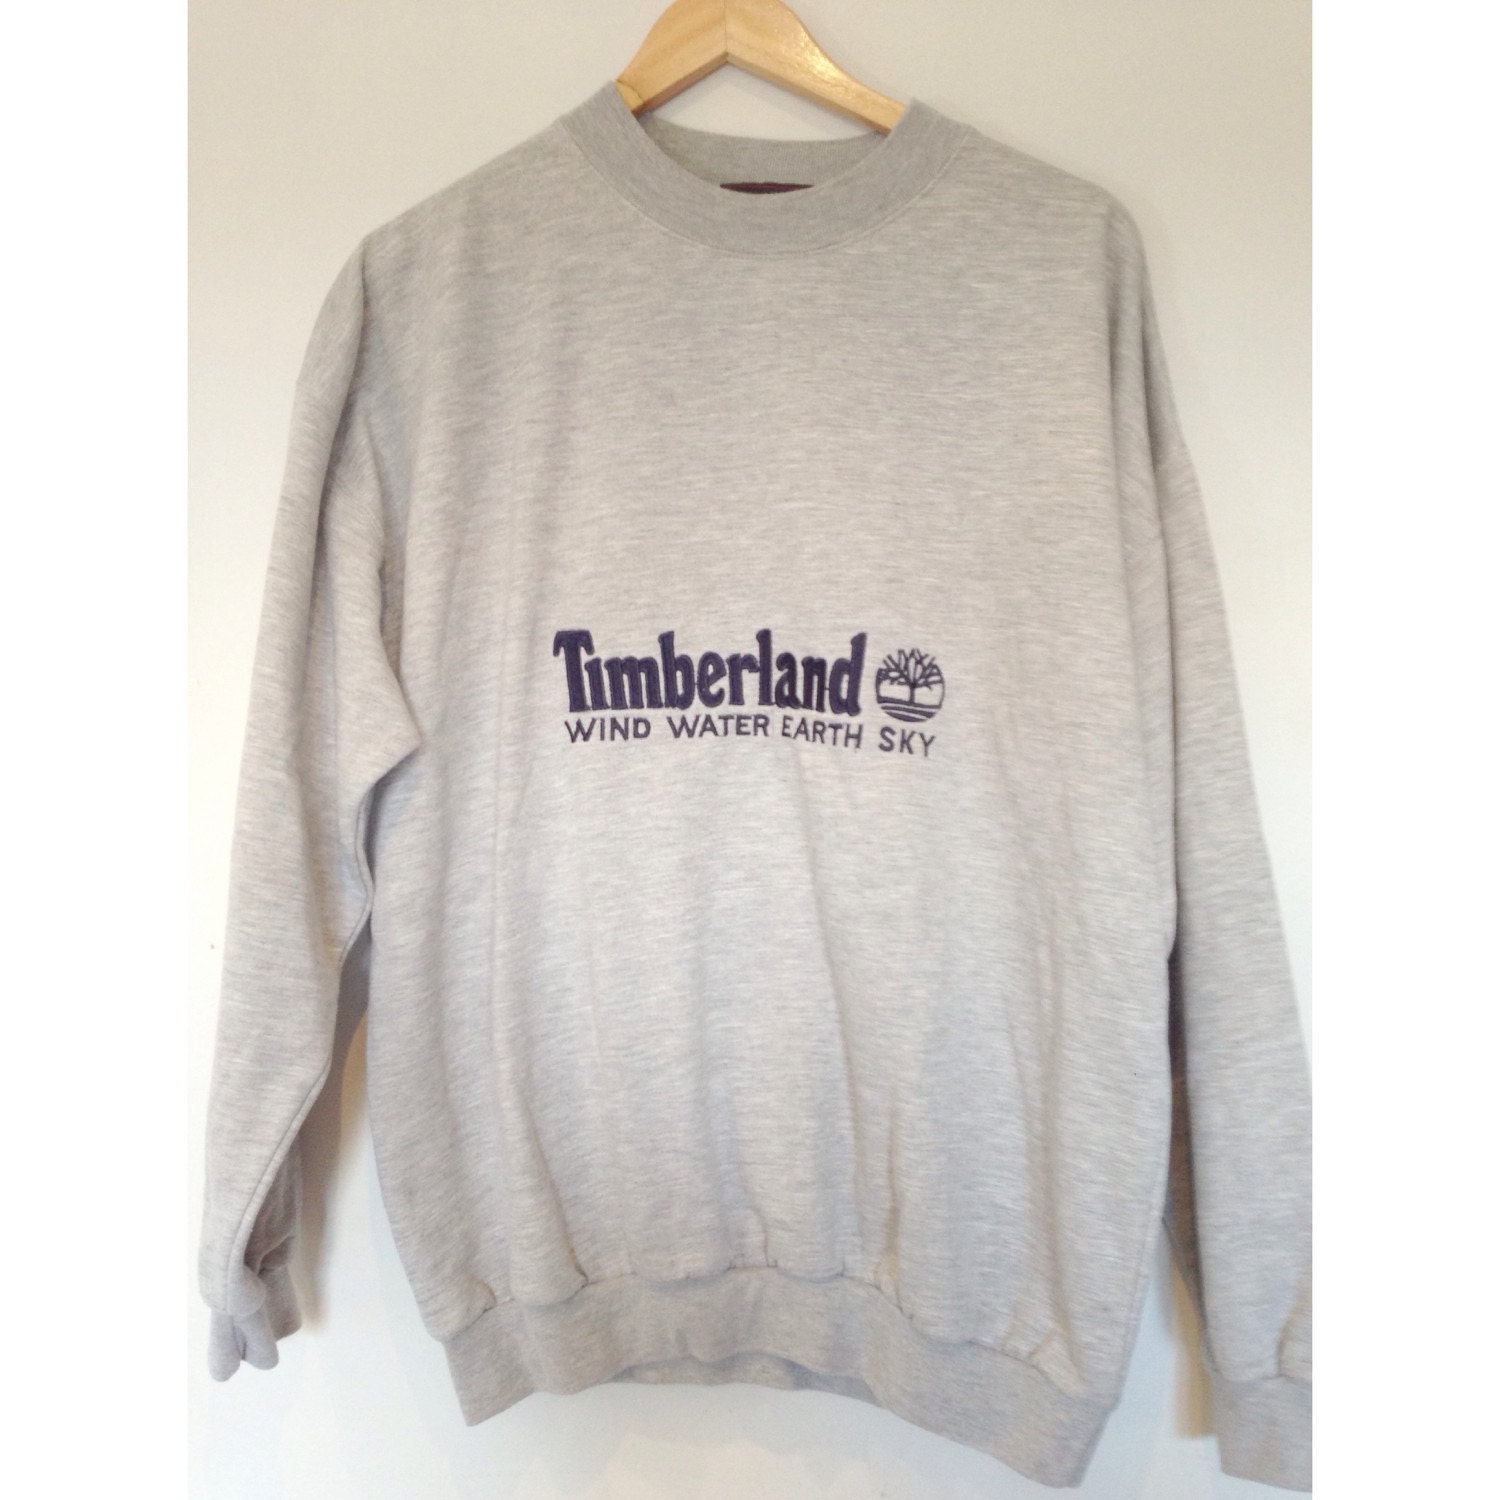 Vintage 90s Timberland sweatshirt by CTrillVintage on Etsy